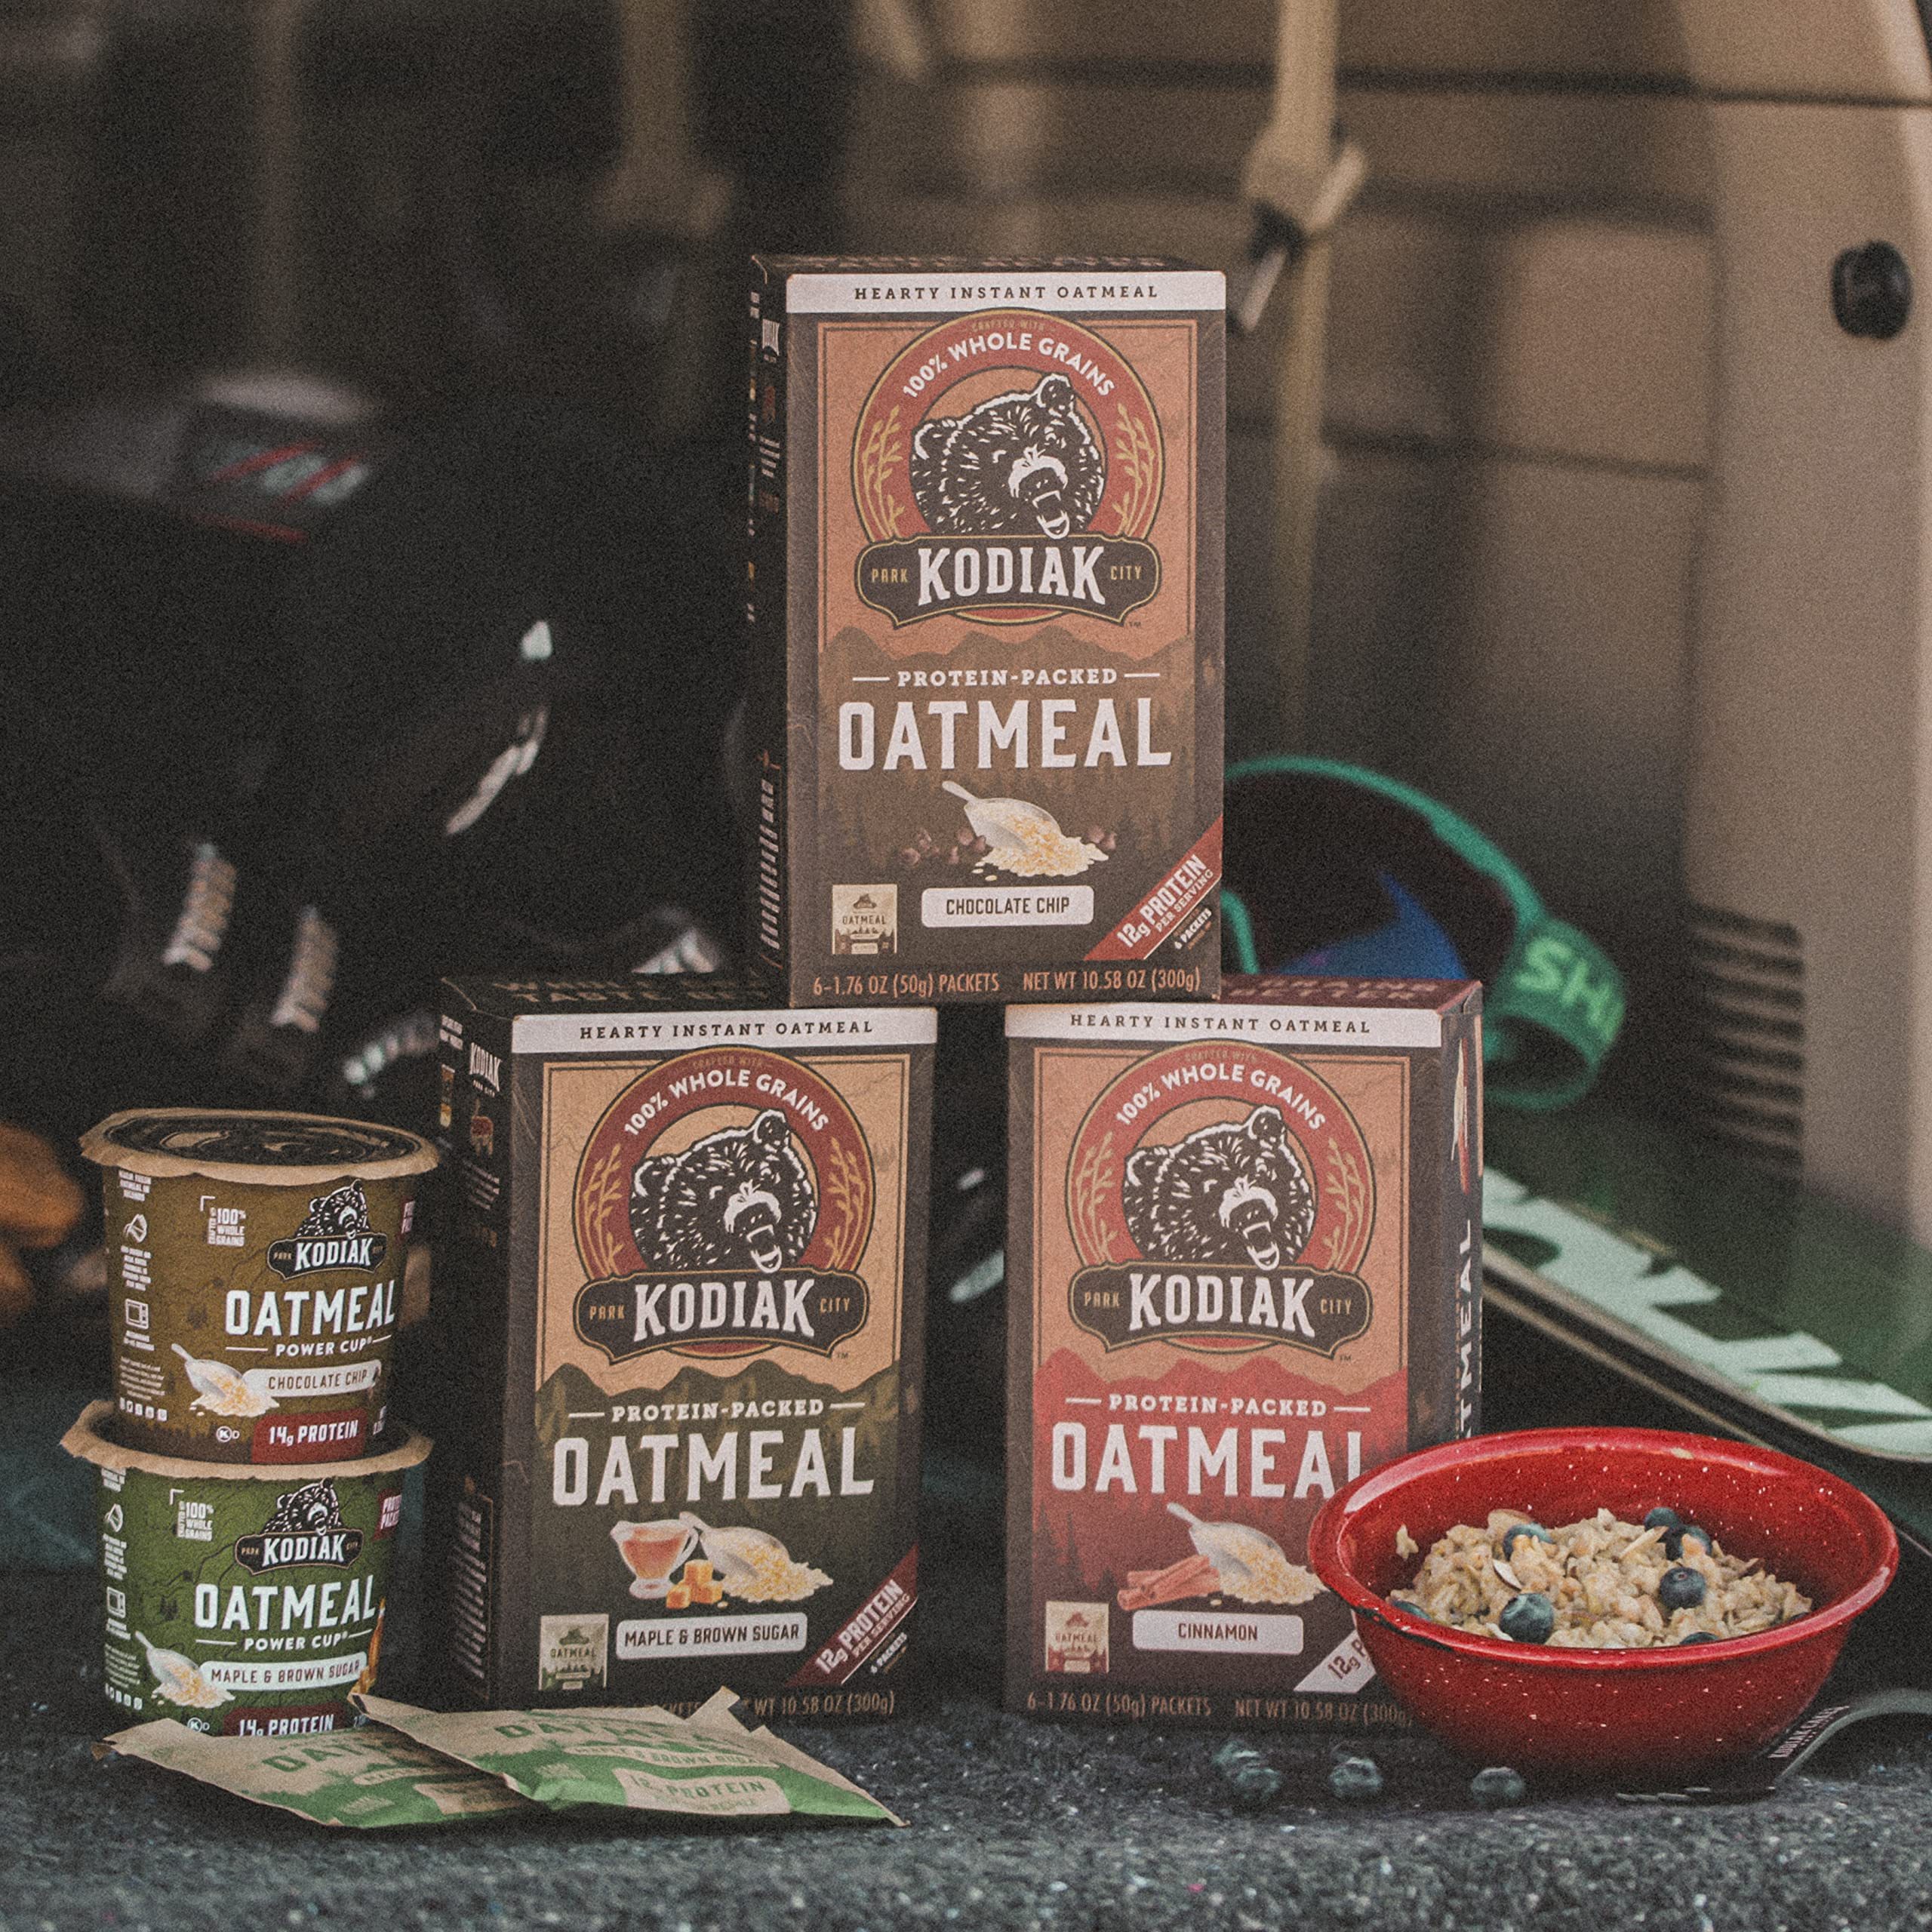 Kodiak Cakes Instant Oatmeal Packets - High Protein - 100% Whole Grains Breakfast Food - Maple & Brown Sugar, Cinnamon, & Chocolate Chip (24 Packets)